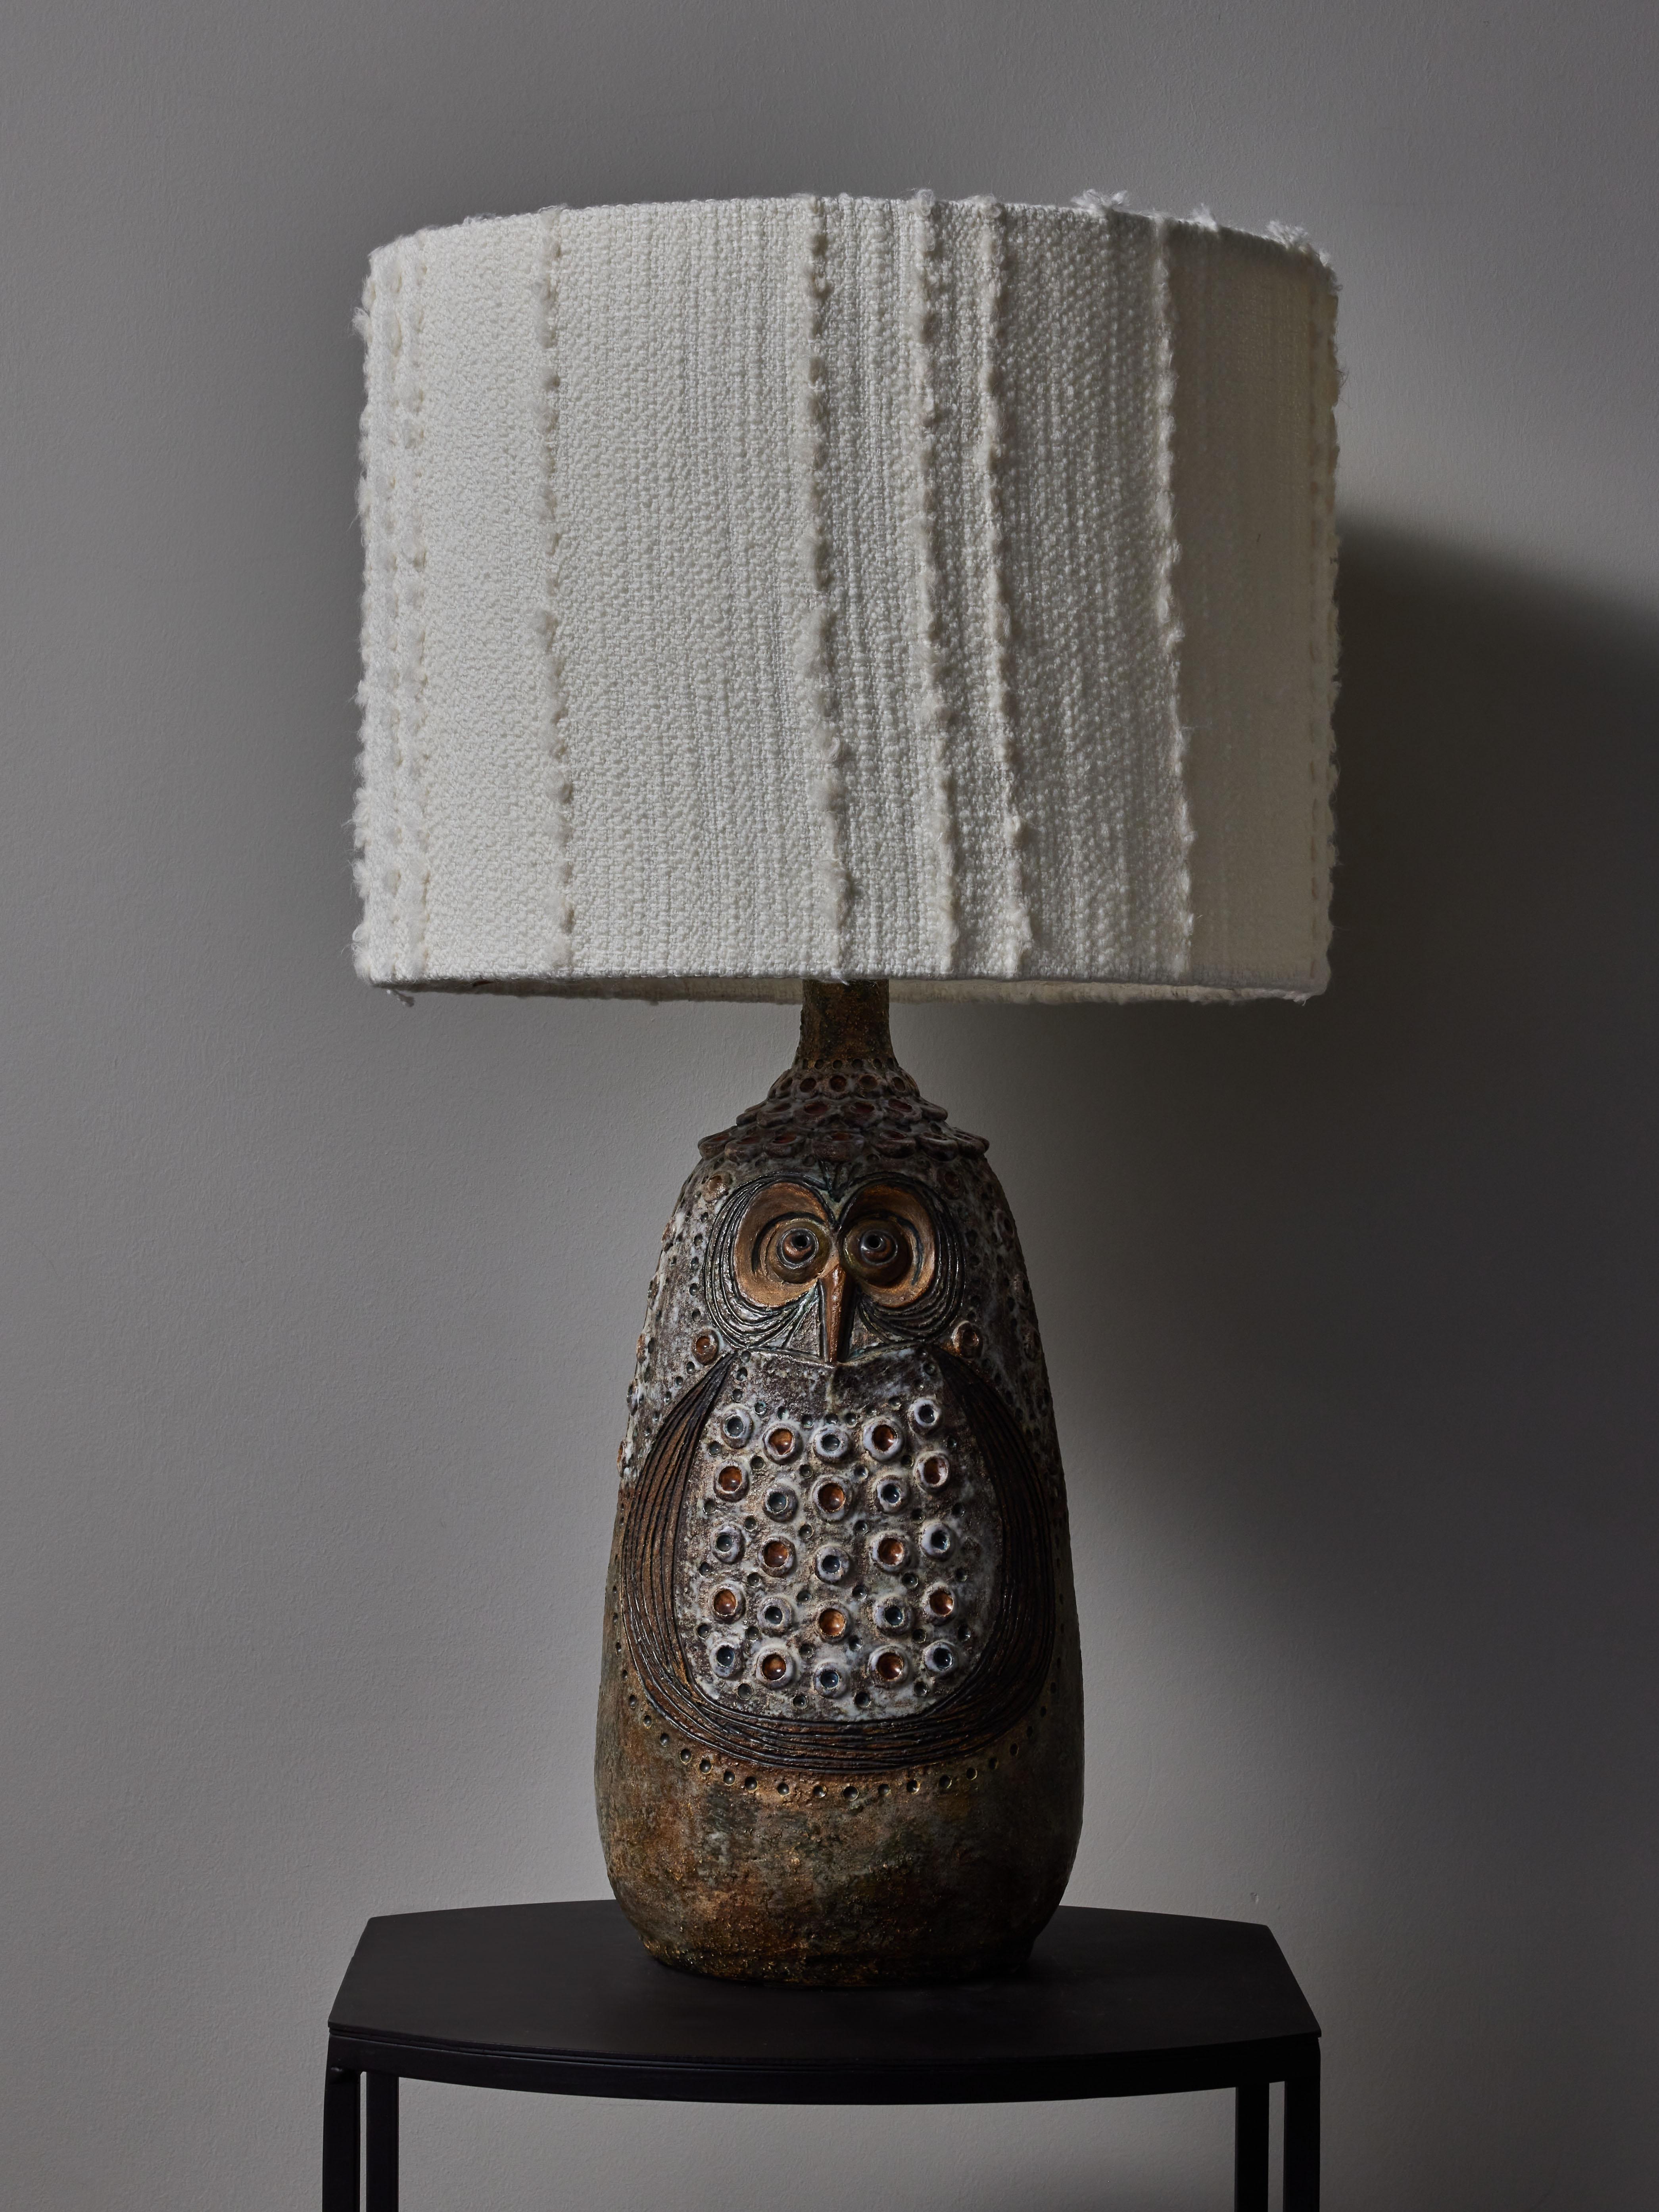 Vintage ceramic table lamp shaped like an owl with small dots of colours by Raphael Giarrusso circa 1966.

Raphaël Giarrusso (1925-1986)
Canadian painter, sculptor and ceramist who established himself in France since 1948 until his death in 1986.